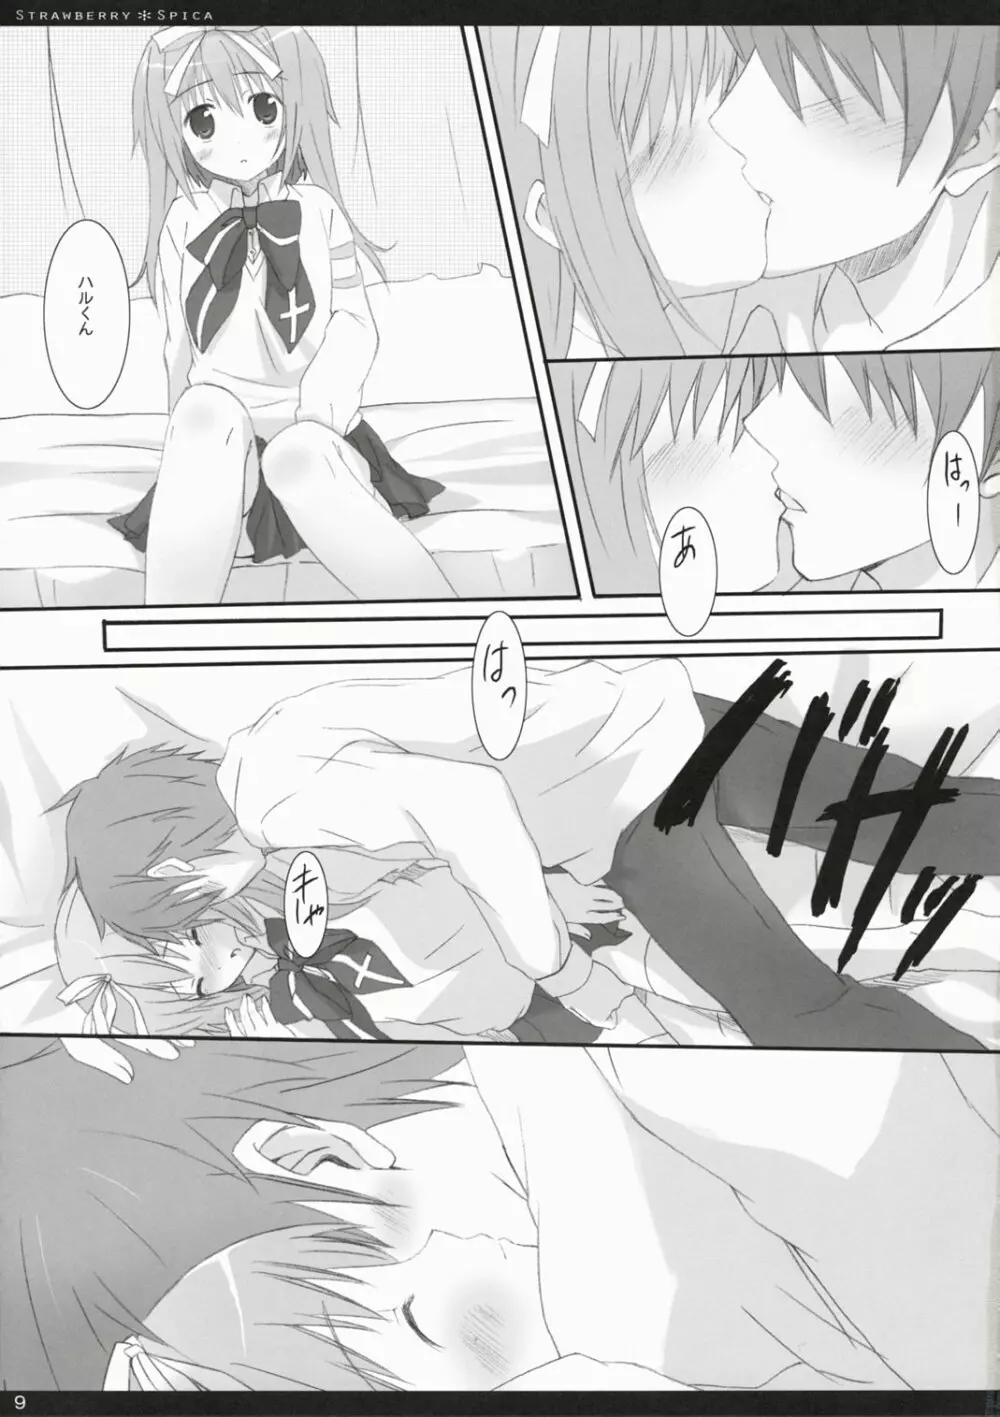 Strawberry Spica Page.8